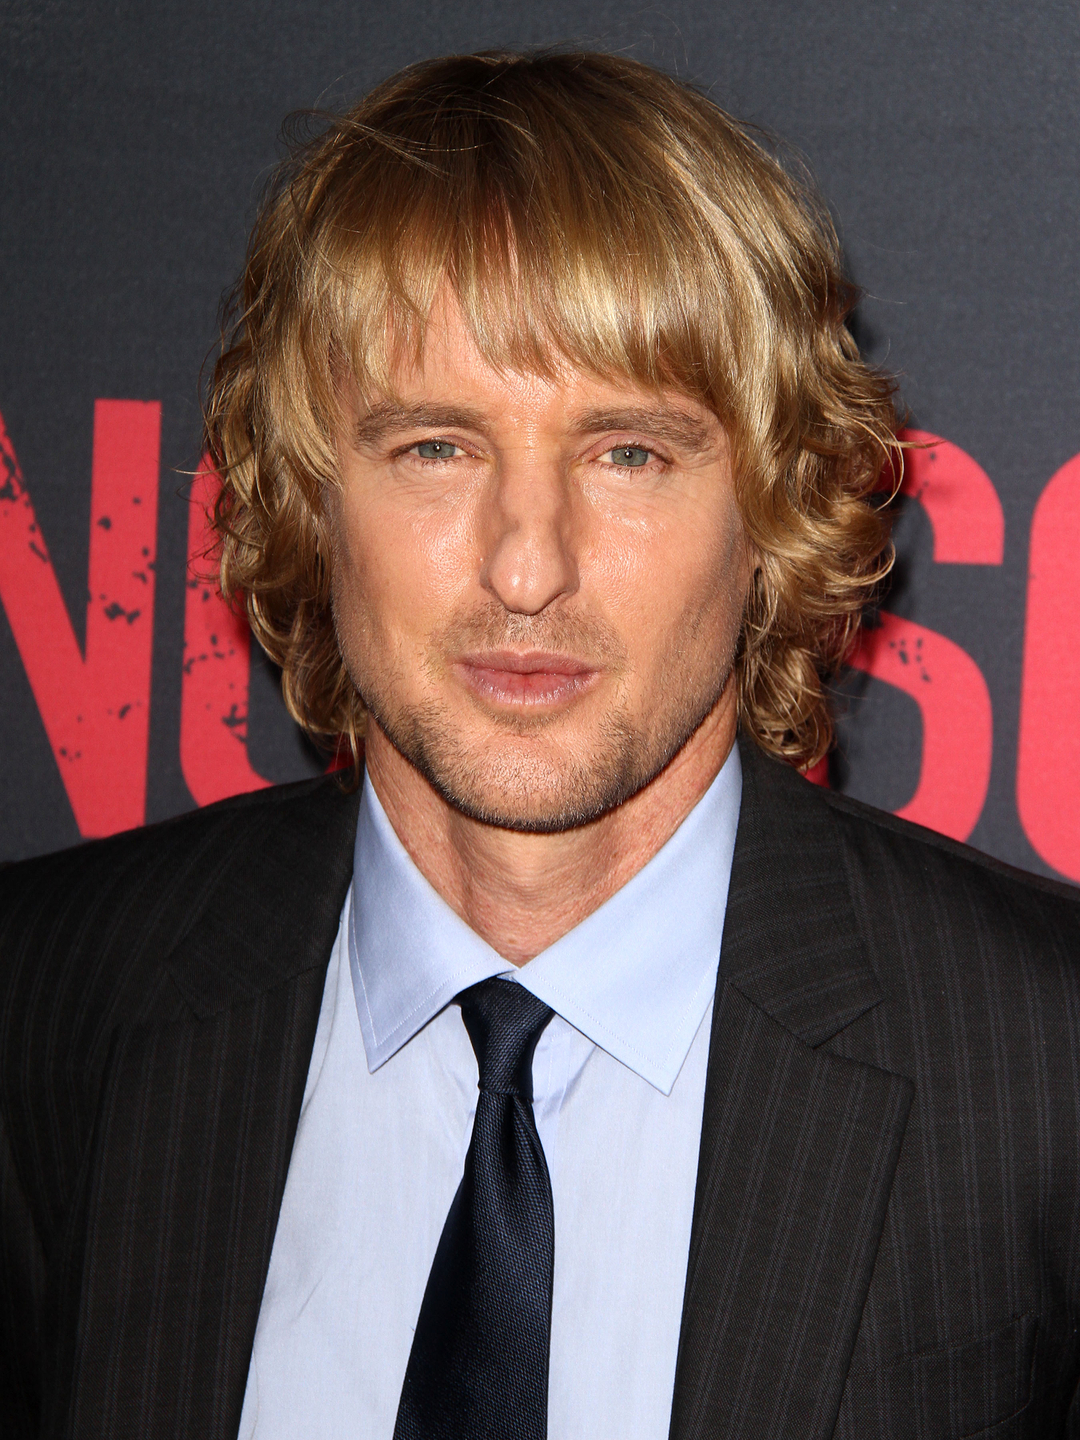 Owen Wilson does he have a wife